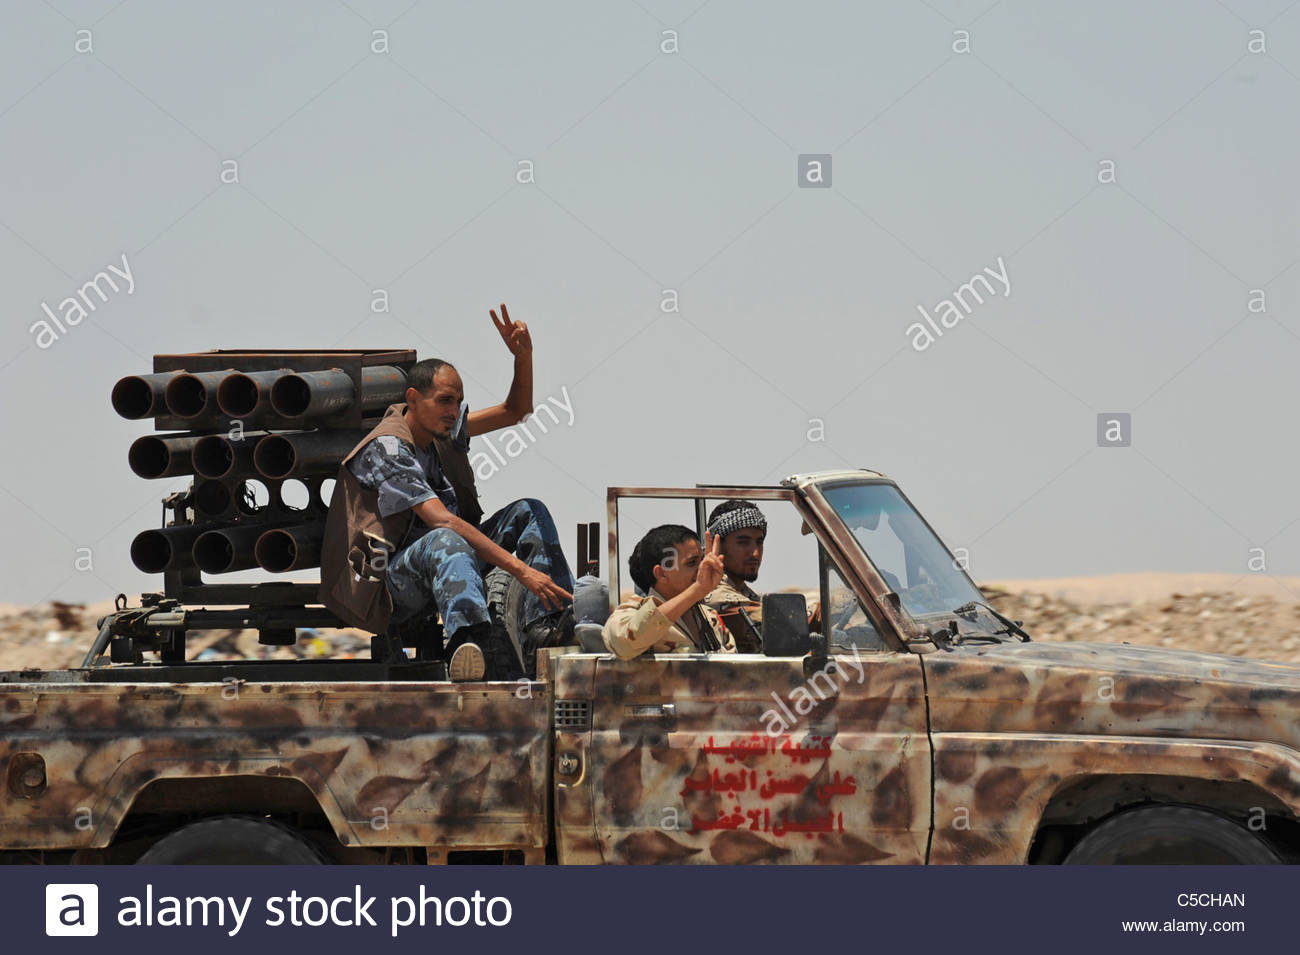 a-six-barrel-rocket-launcher-on-the-beck-of-a-pick-up-truck-on-the-C5CHAN.jpg